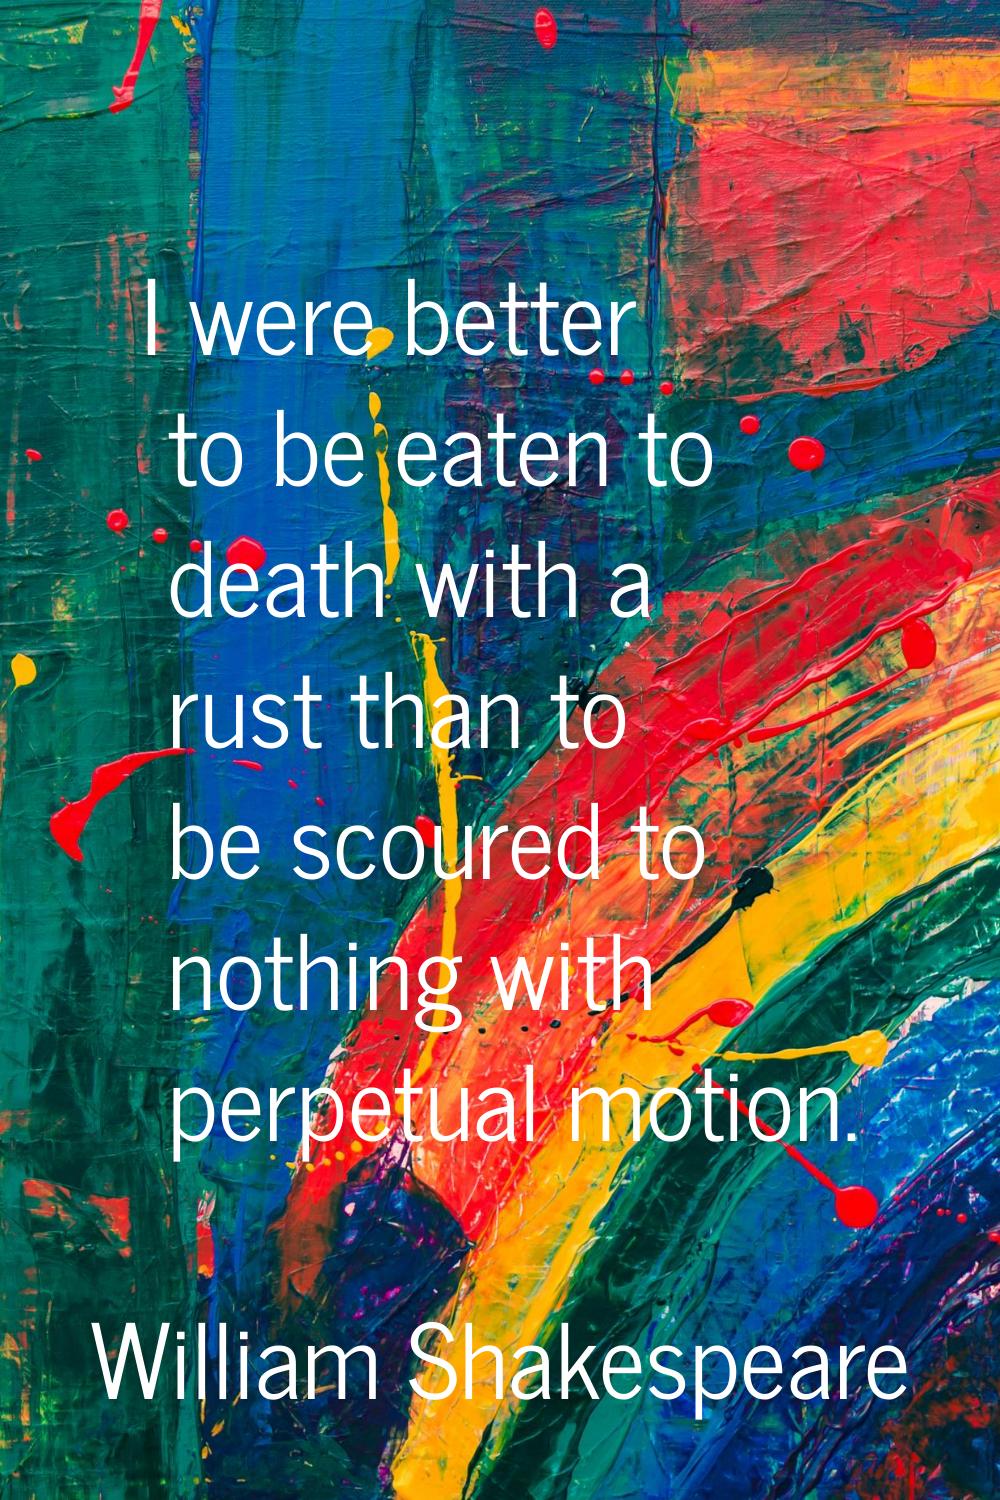 I were better to be eaten to death with a rust than to be scoured to nothing with perpetual motion.